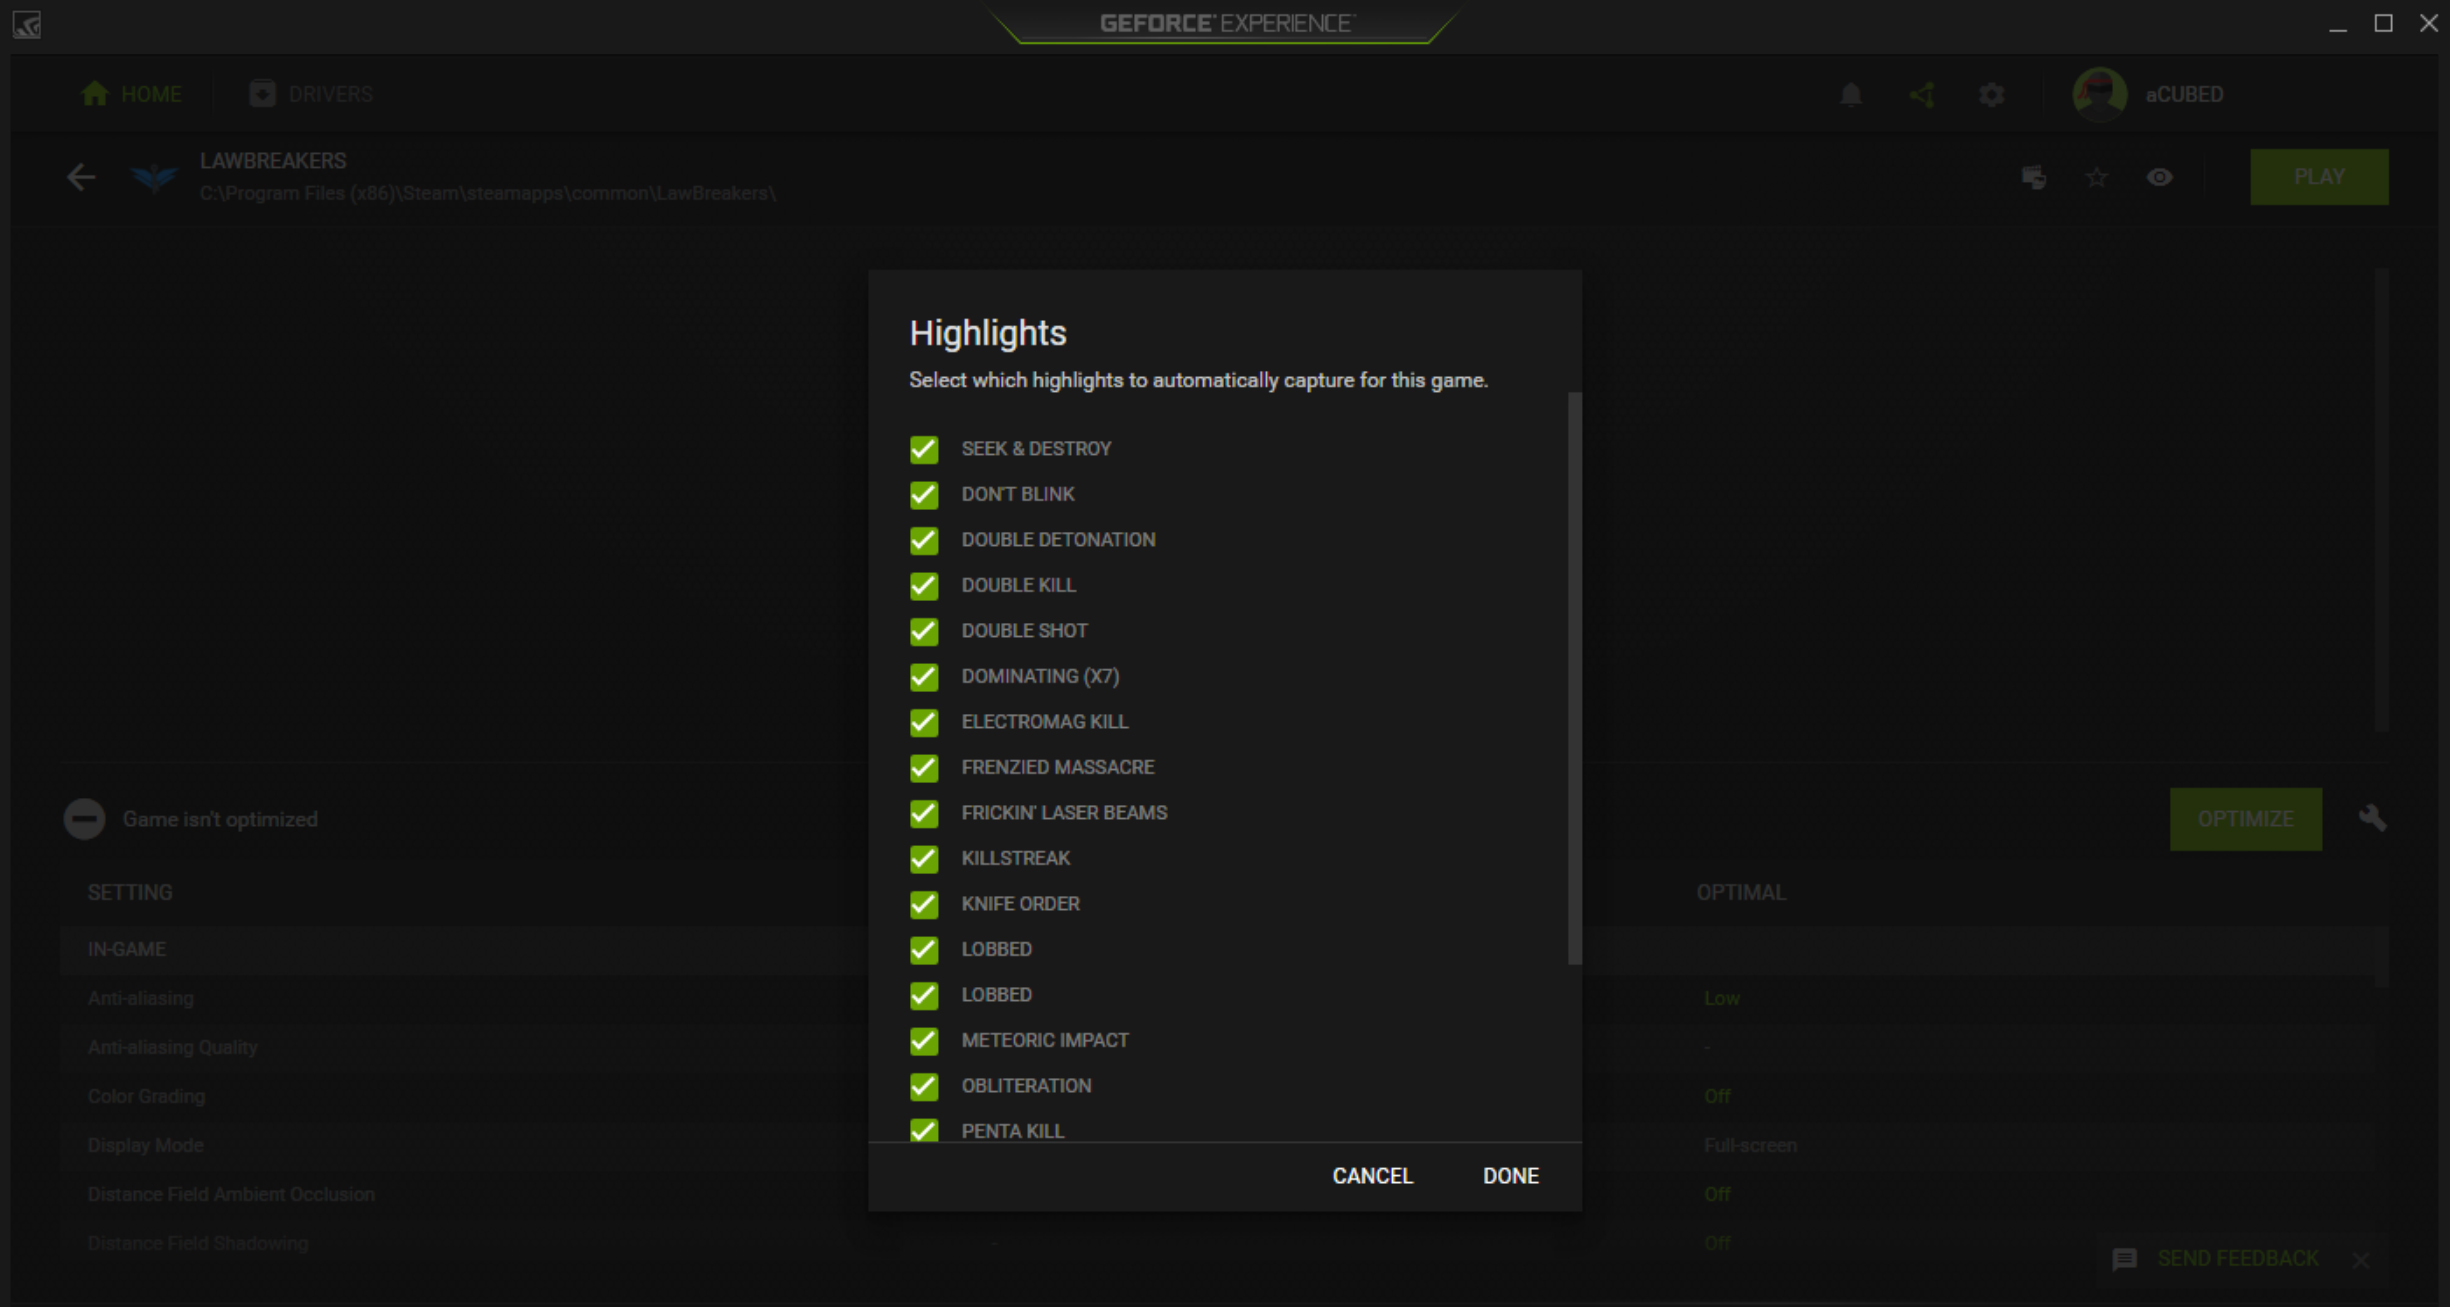 Nvidia Driver 384 94 Release Brings Optimizations And Shadowplay Highlights For Lawbreakers